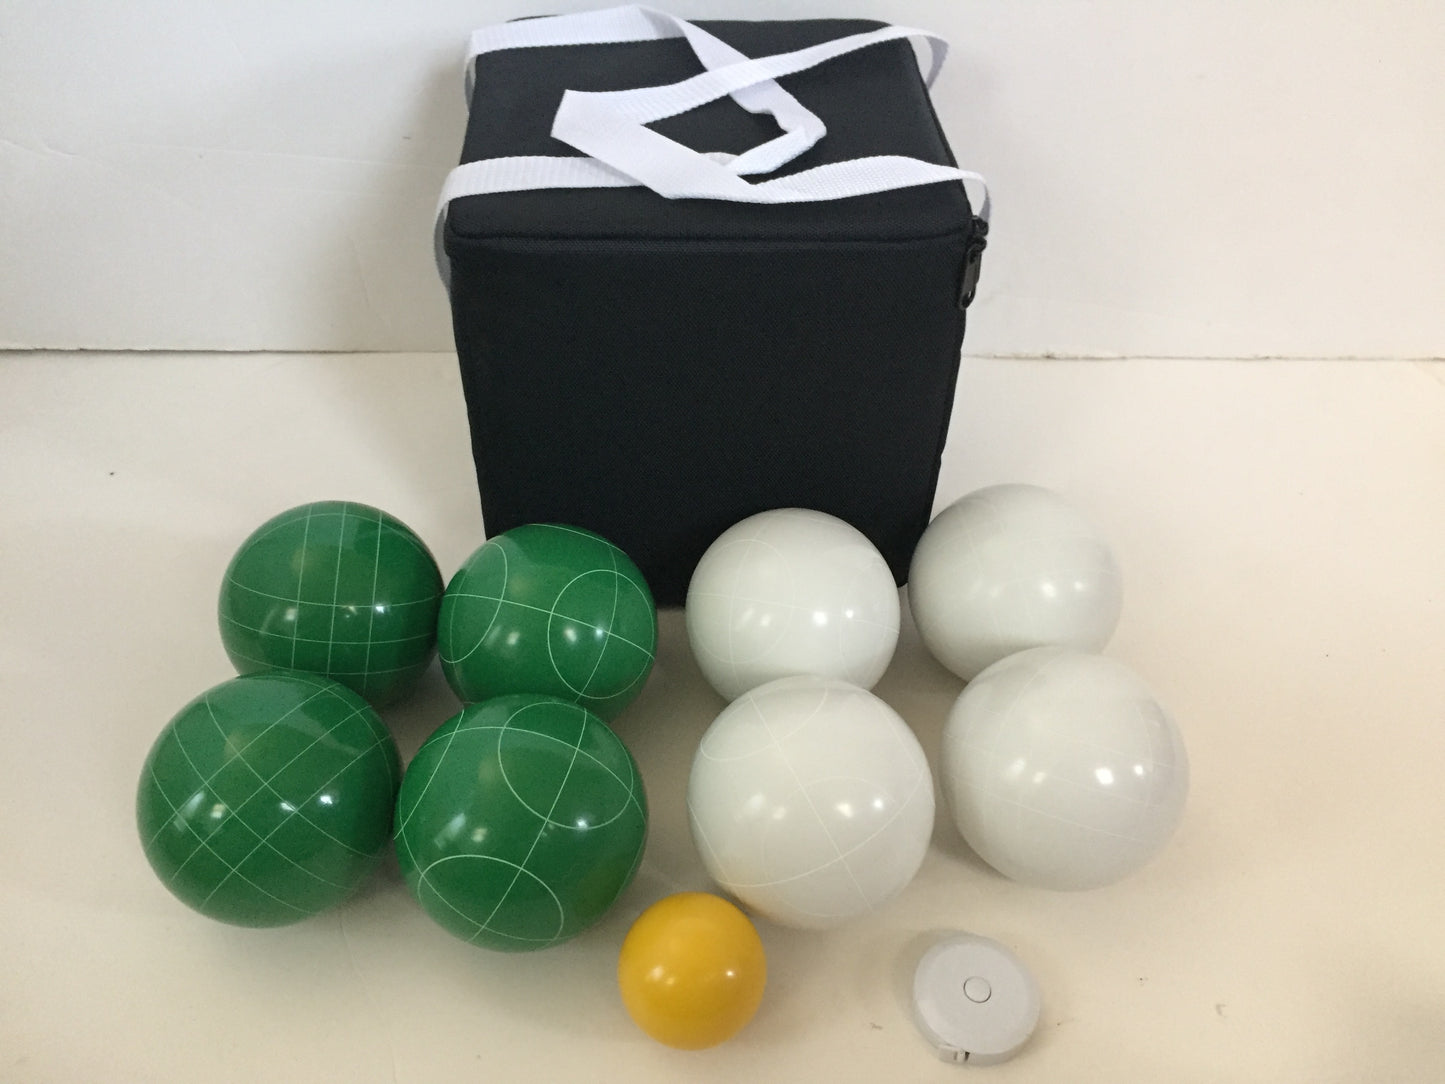 107mm with Green and White Balls with Black Bag